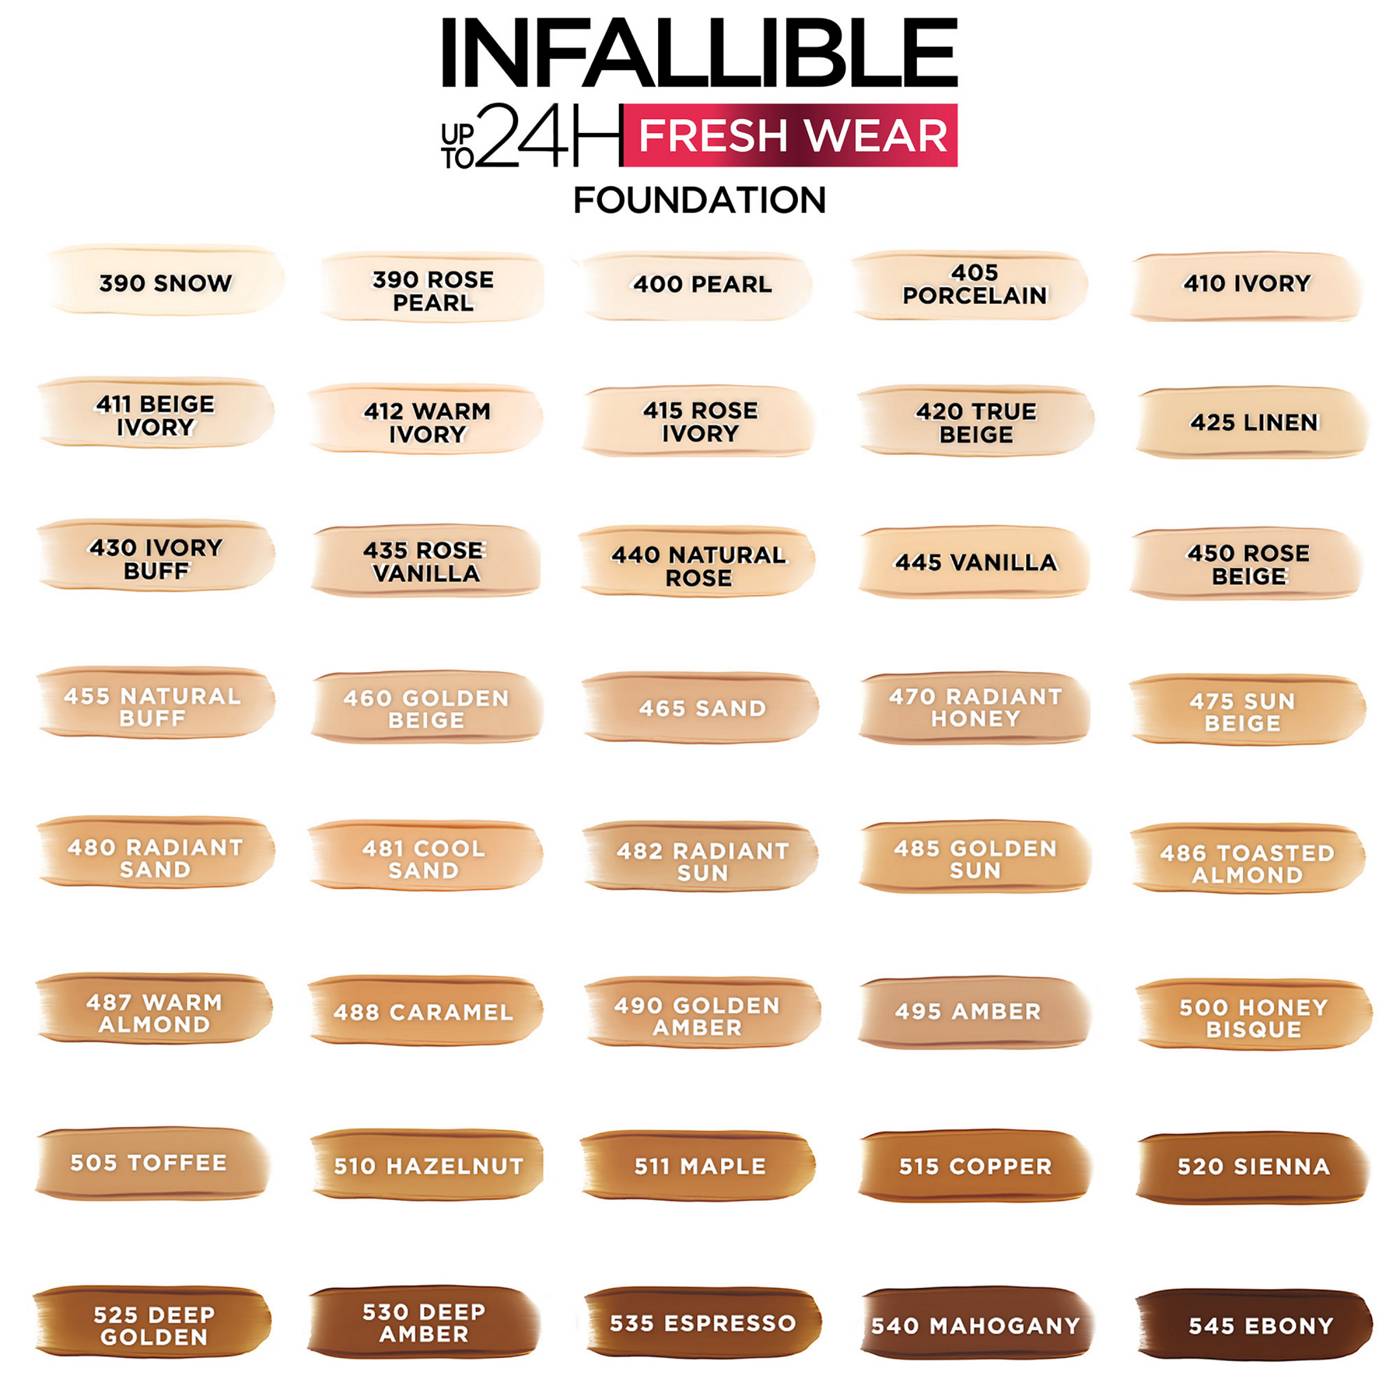 L'Oréal Paris Infallible Up to 24 Hour Fresh Wear Foundation - Lightweight Natural Rose; image 2 of 7